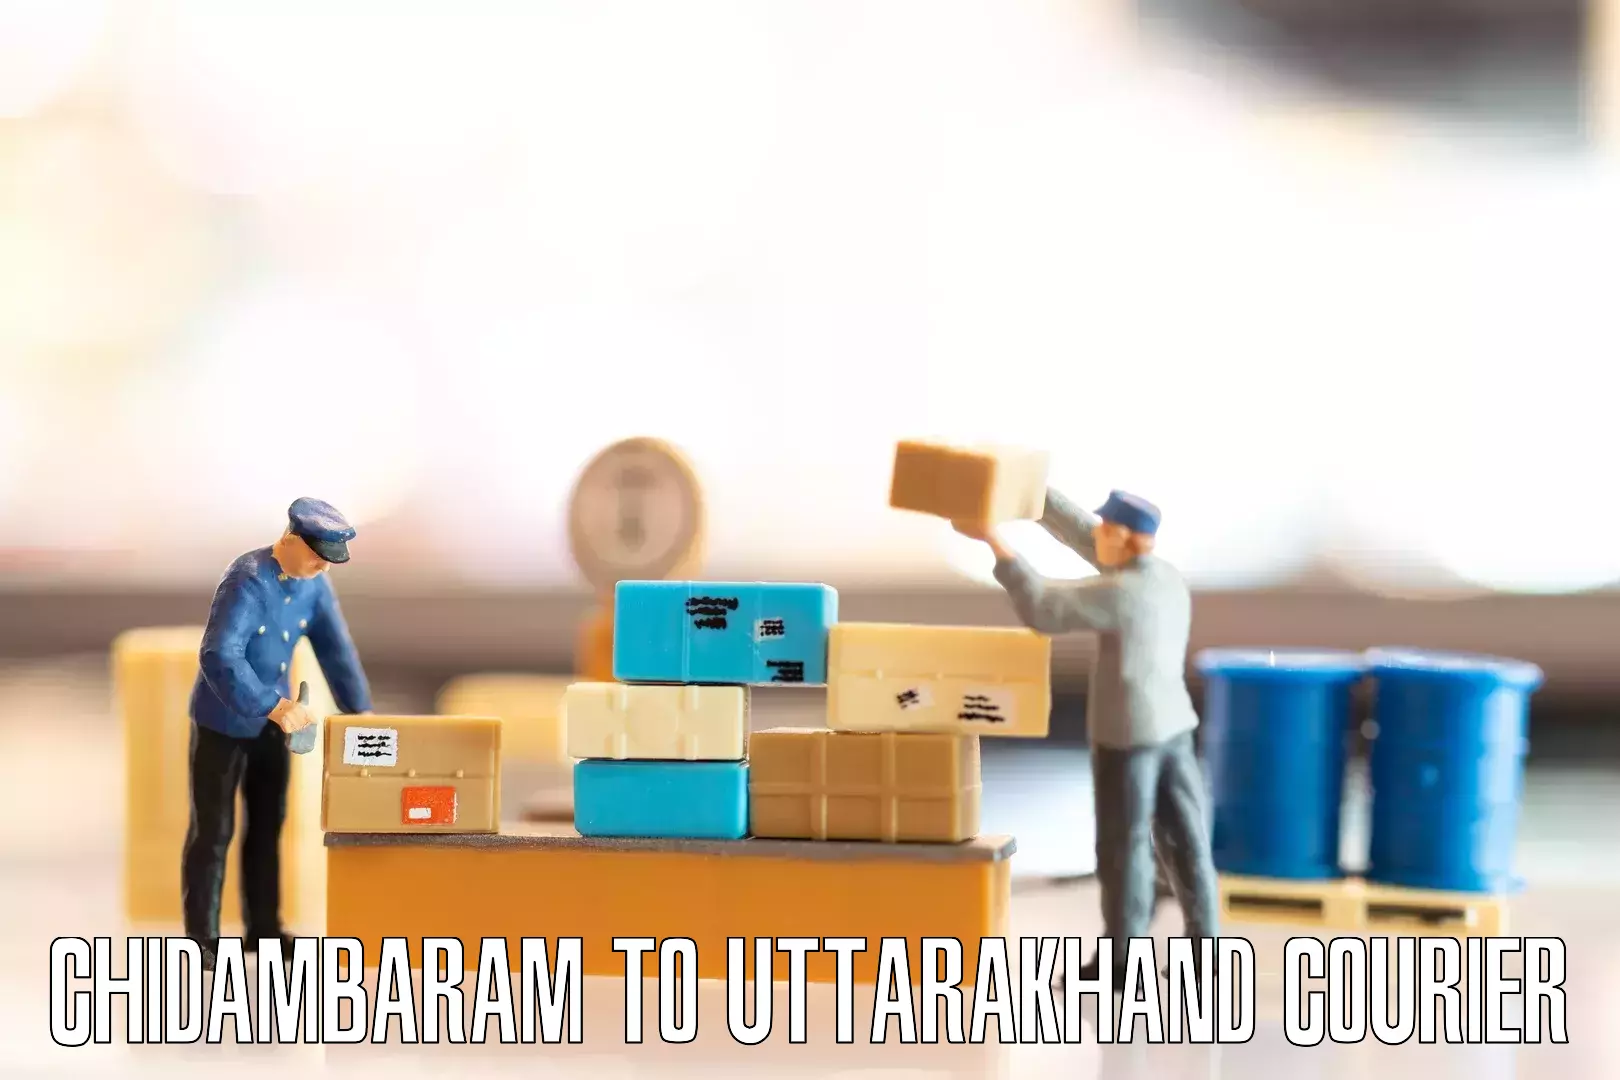 Specialized moving company Chidambaram to IIT Roorkee